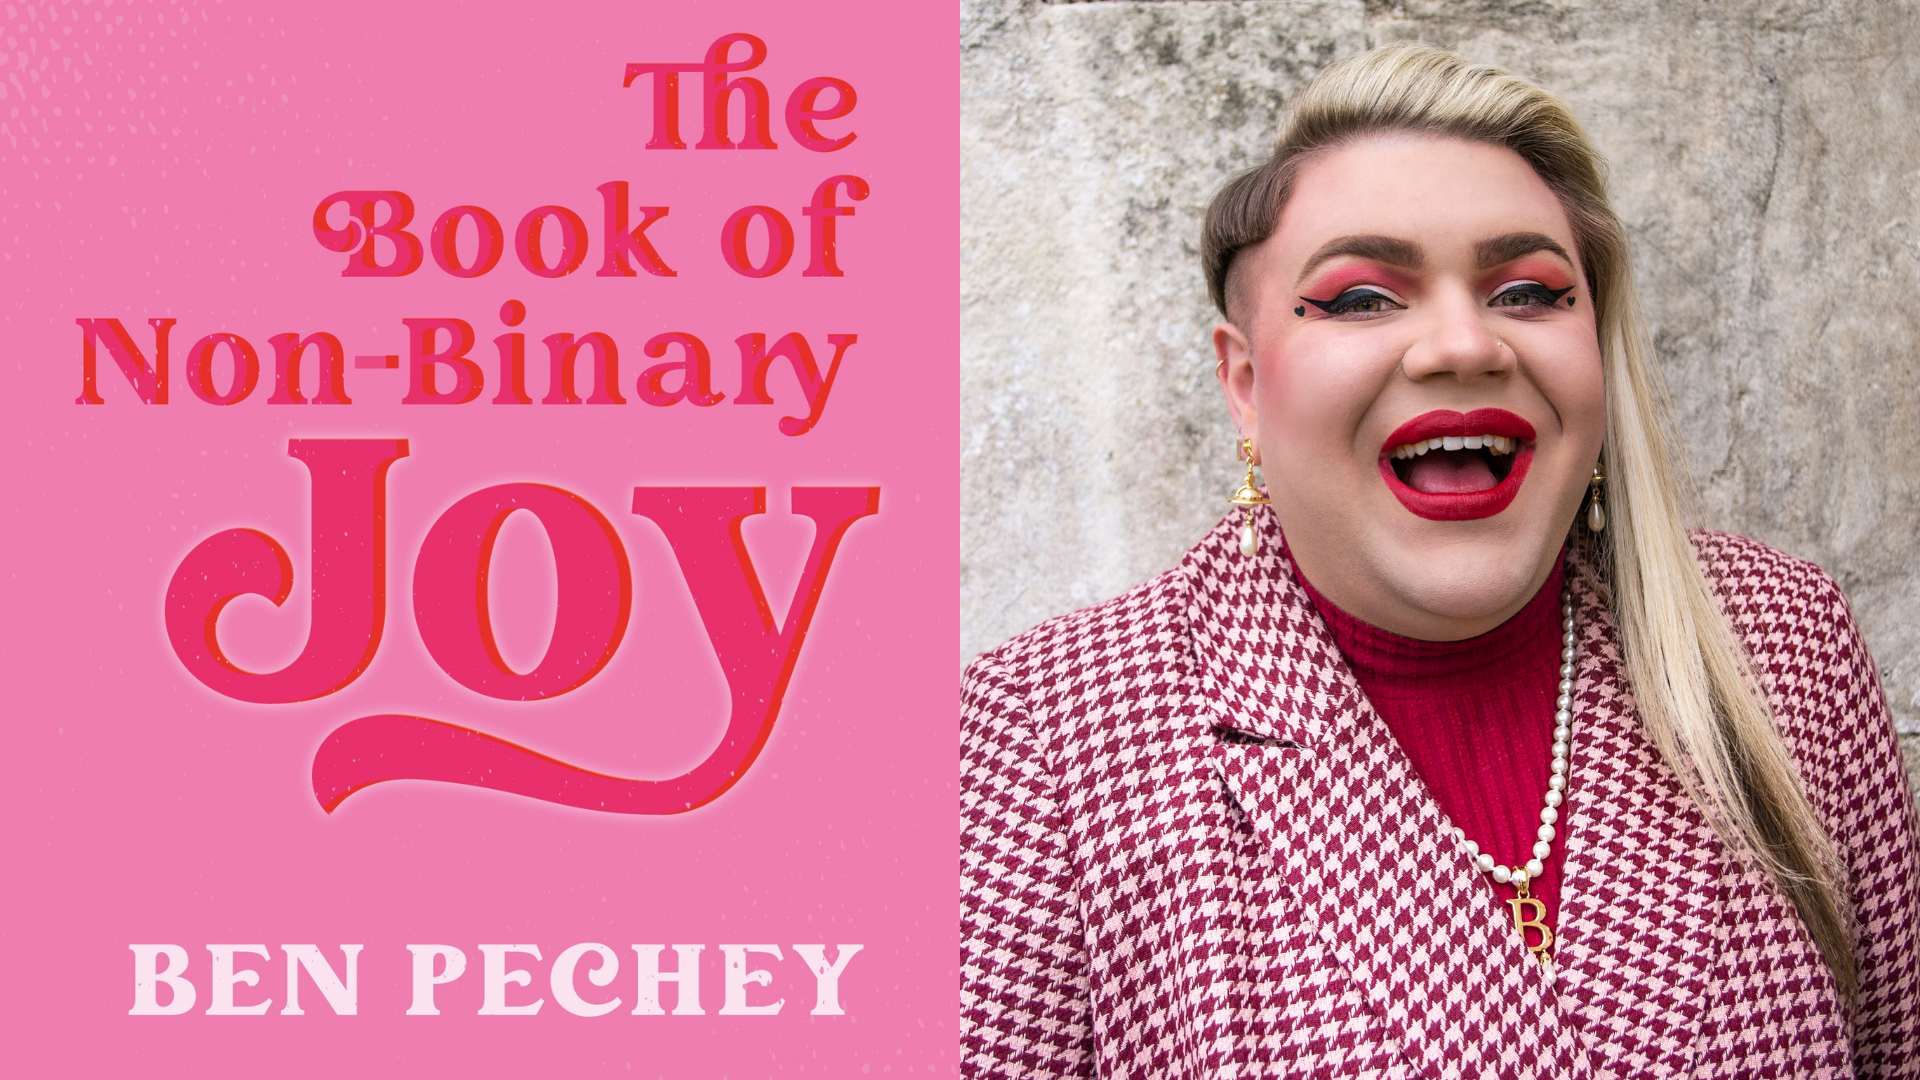 A composite image of the front cover of Ben Pechey's book 